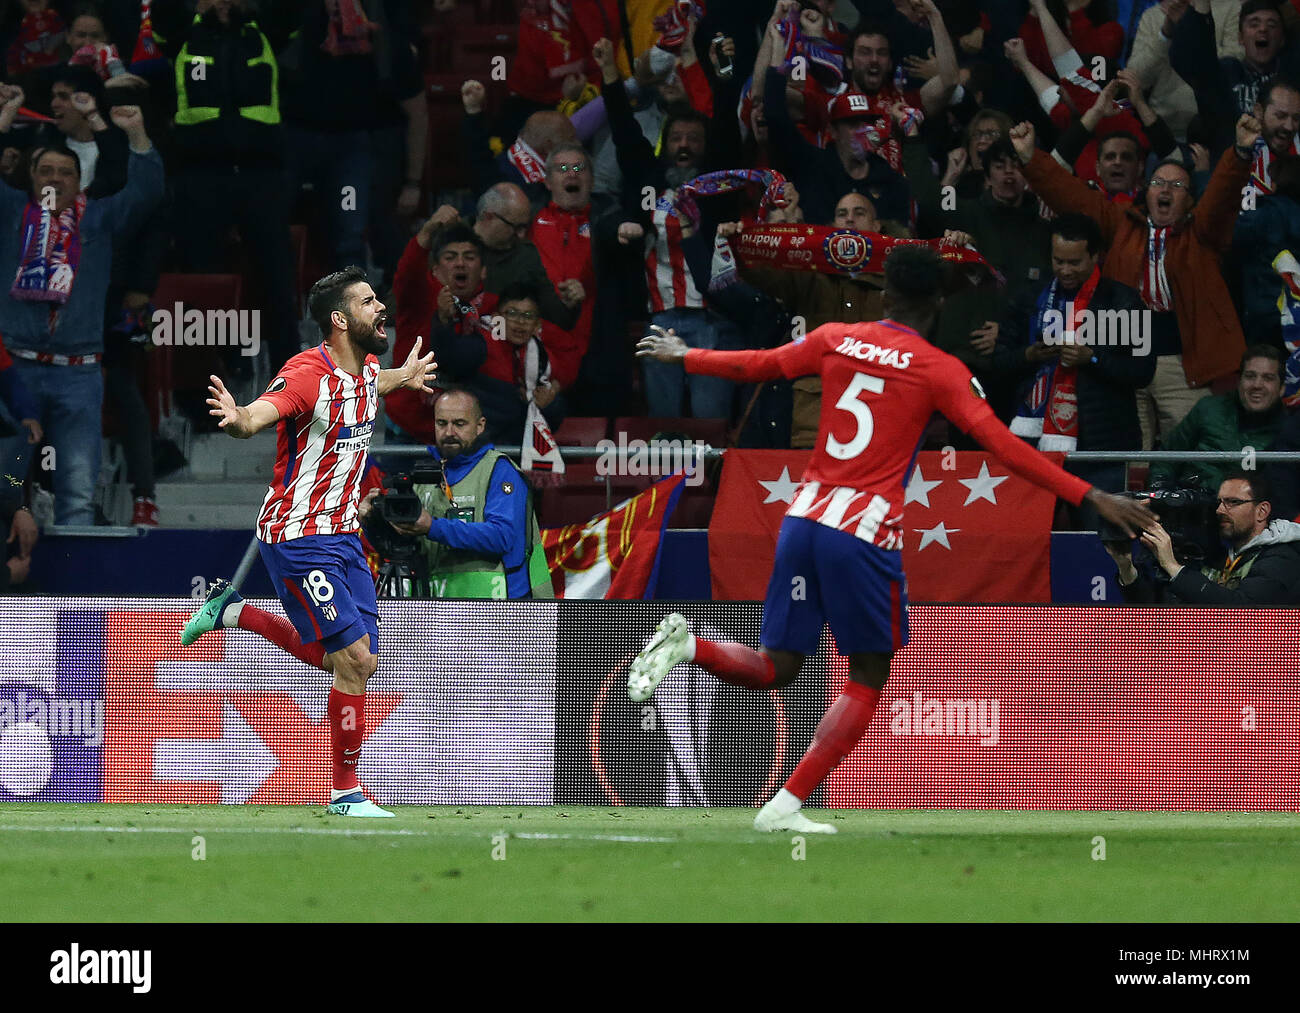 Madrid, Spain. 3rd May 2018. Diego Costa (Club Atletico de Madrid) celebrates after scoring a goal during the UEFA Europa League Semi Final Second Leg match between  Atletico de Madrid and Arsenal FC at the Wanda Metropolitano Stadium in Madrid, Spain. Final Score (Atletico de Madrid 1-0 Arsenal FC). Credit: SOPA Images Limited/Alamy Live News Stock Photo